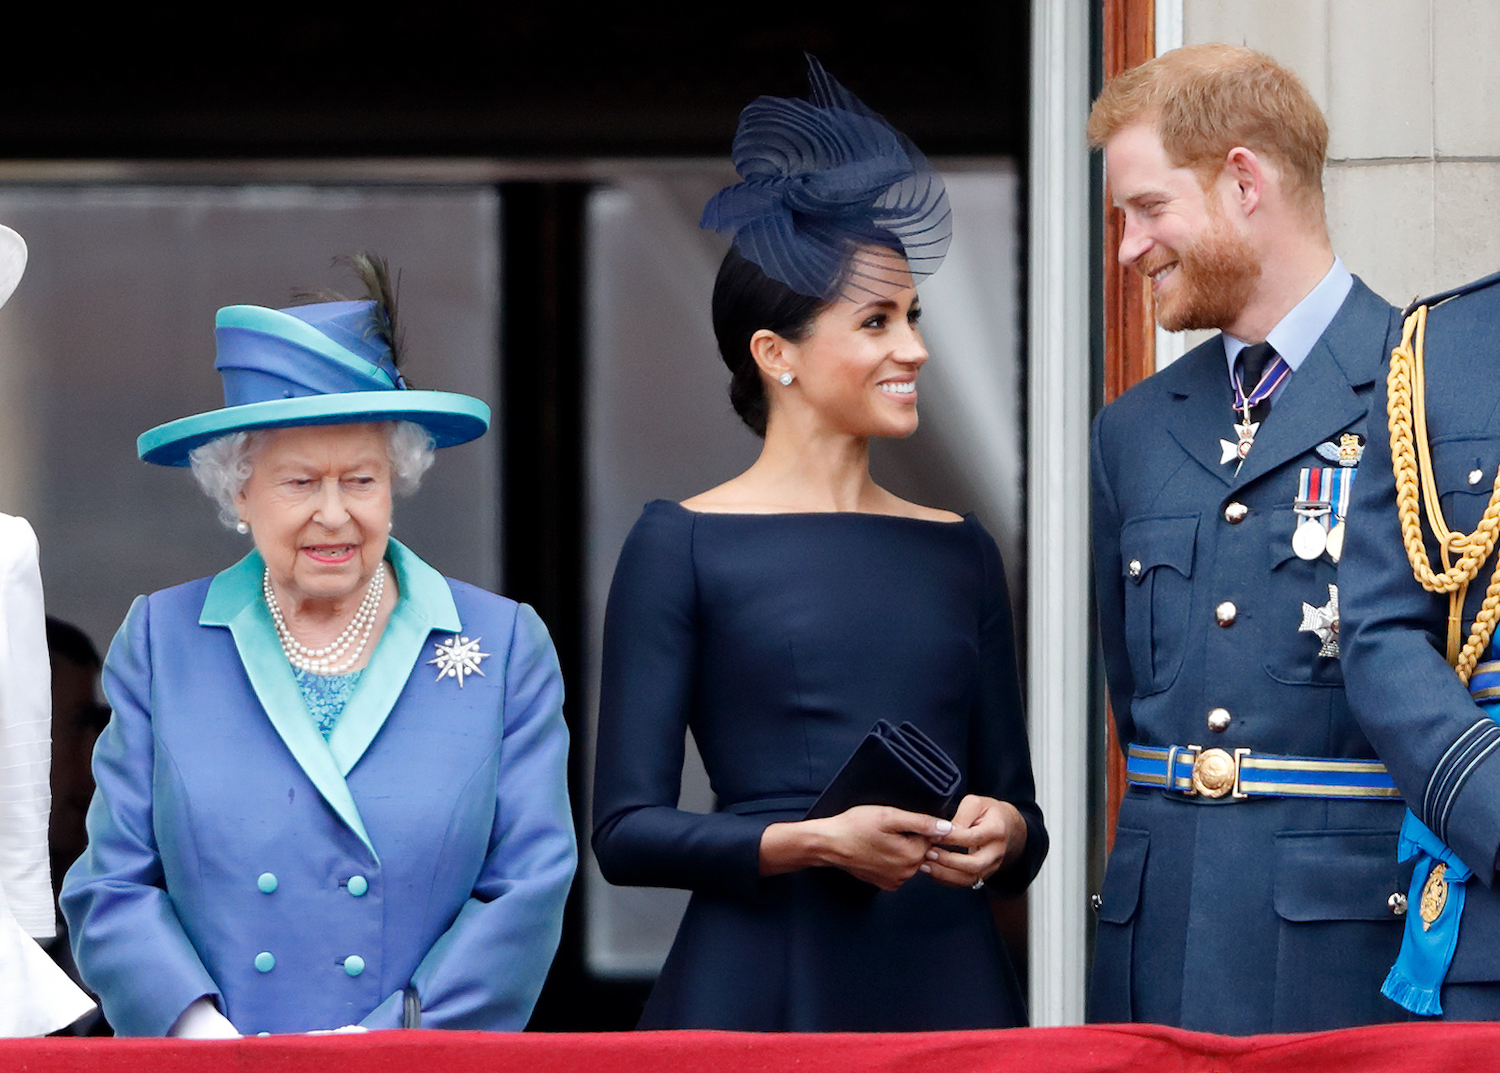 Queen Elizabeth II, Meghan Markle, and Prince Harry watch a flypast to mark the centenary of the Royal Air Force from the balcony of Buckingham Palace